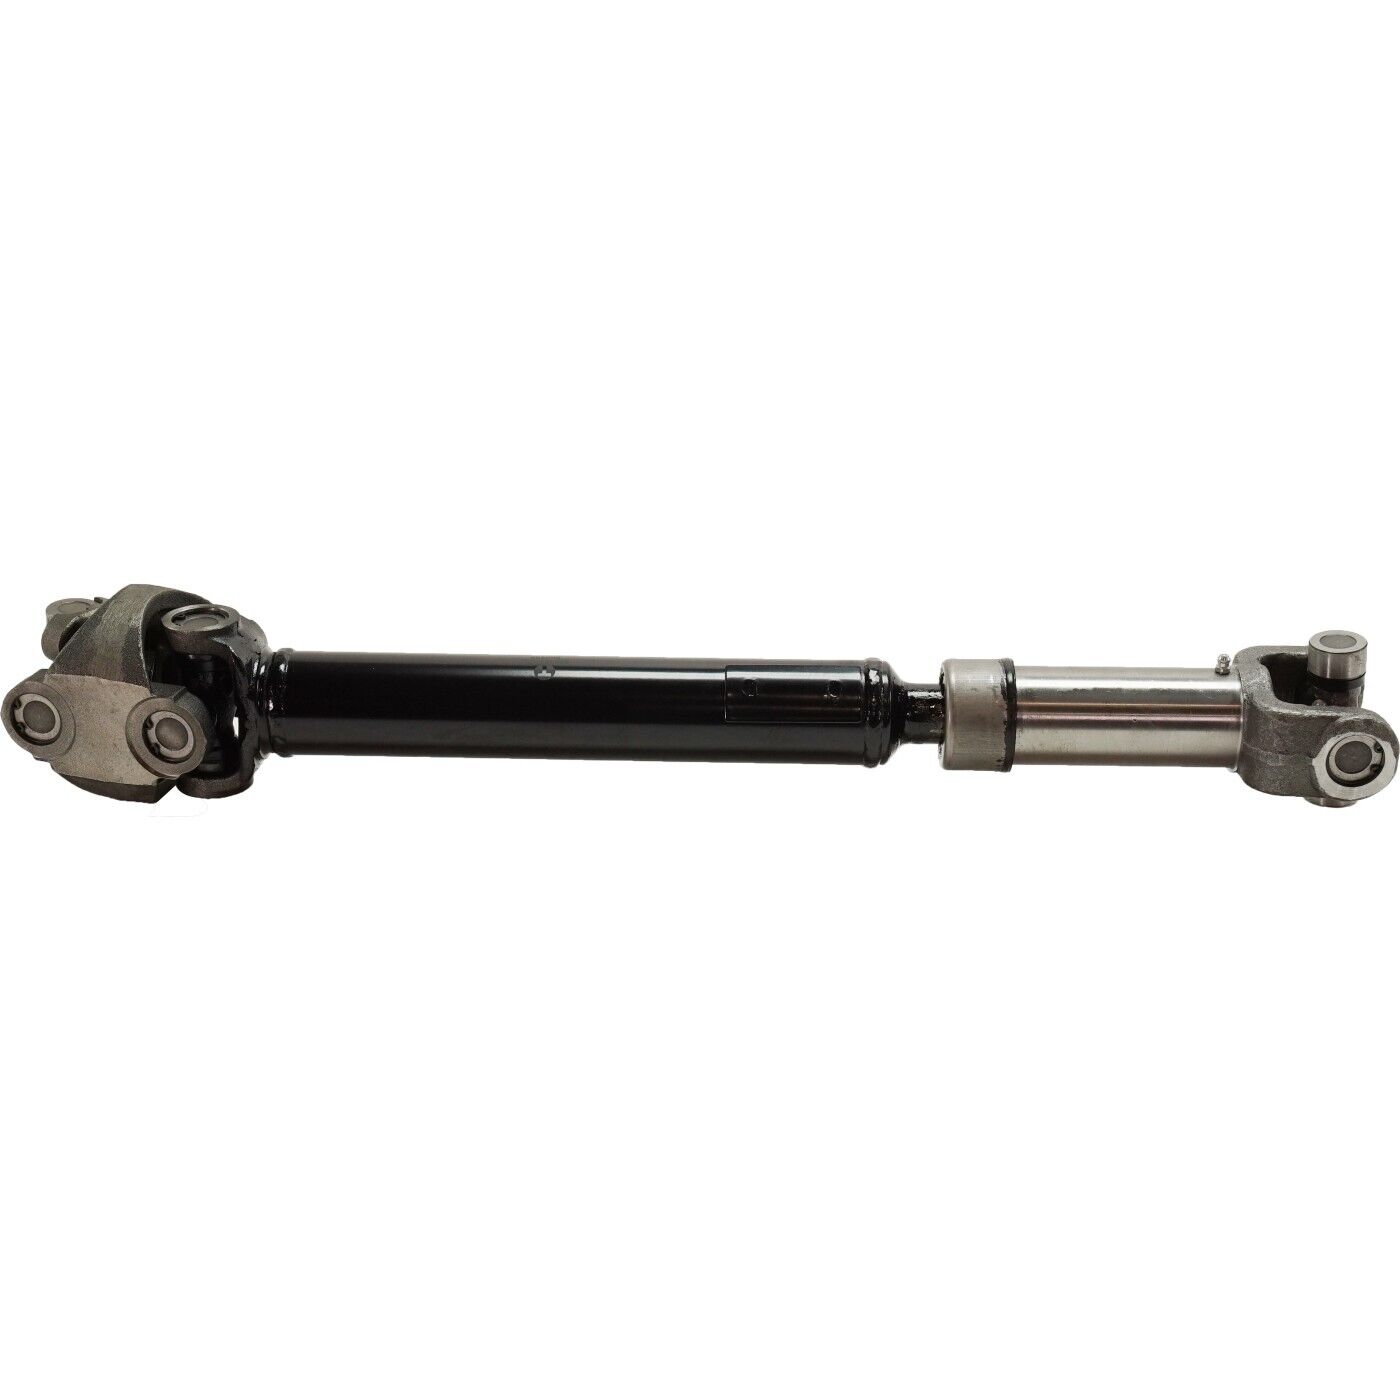 Front Driveshaft For 1966-1970 Ford Bronco Greasable Steel 23.31 Inches Length